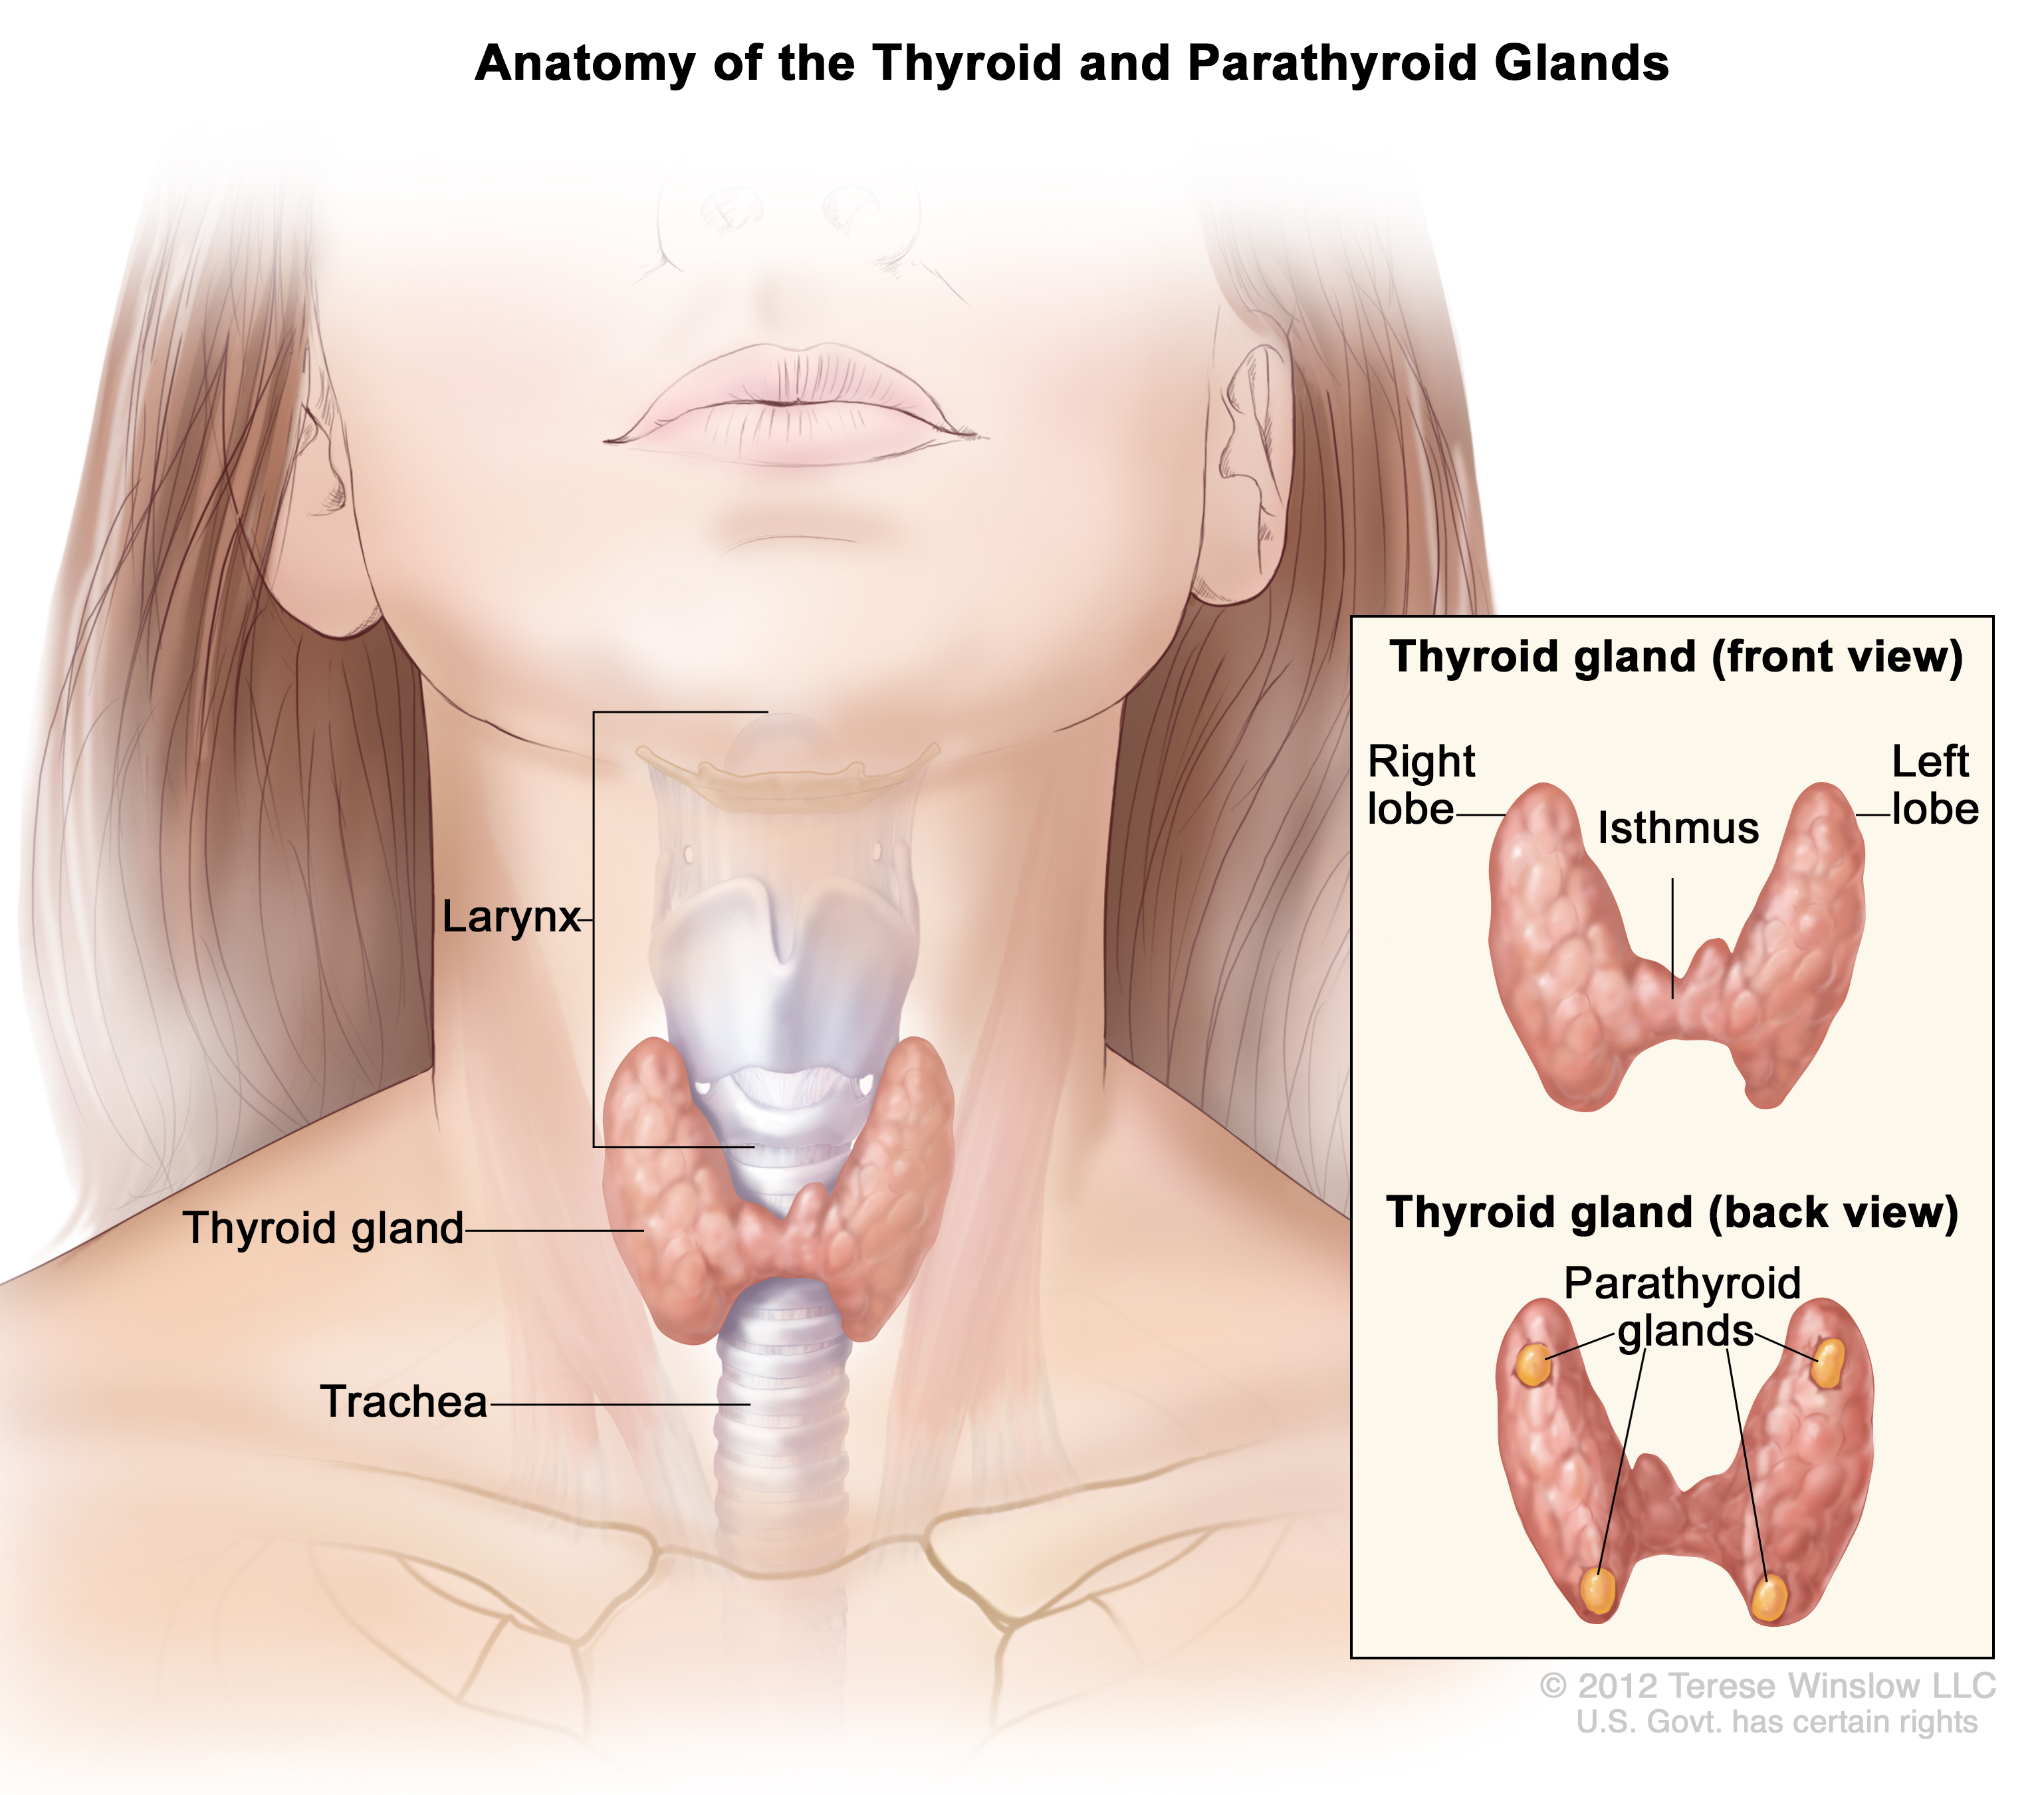 Diagram of the anatomy of thyroid and parathyroid glands